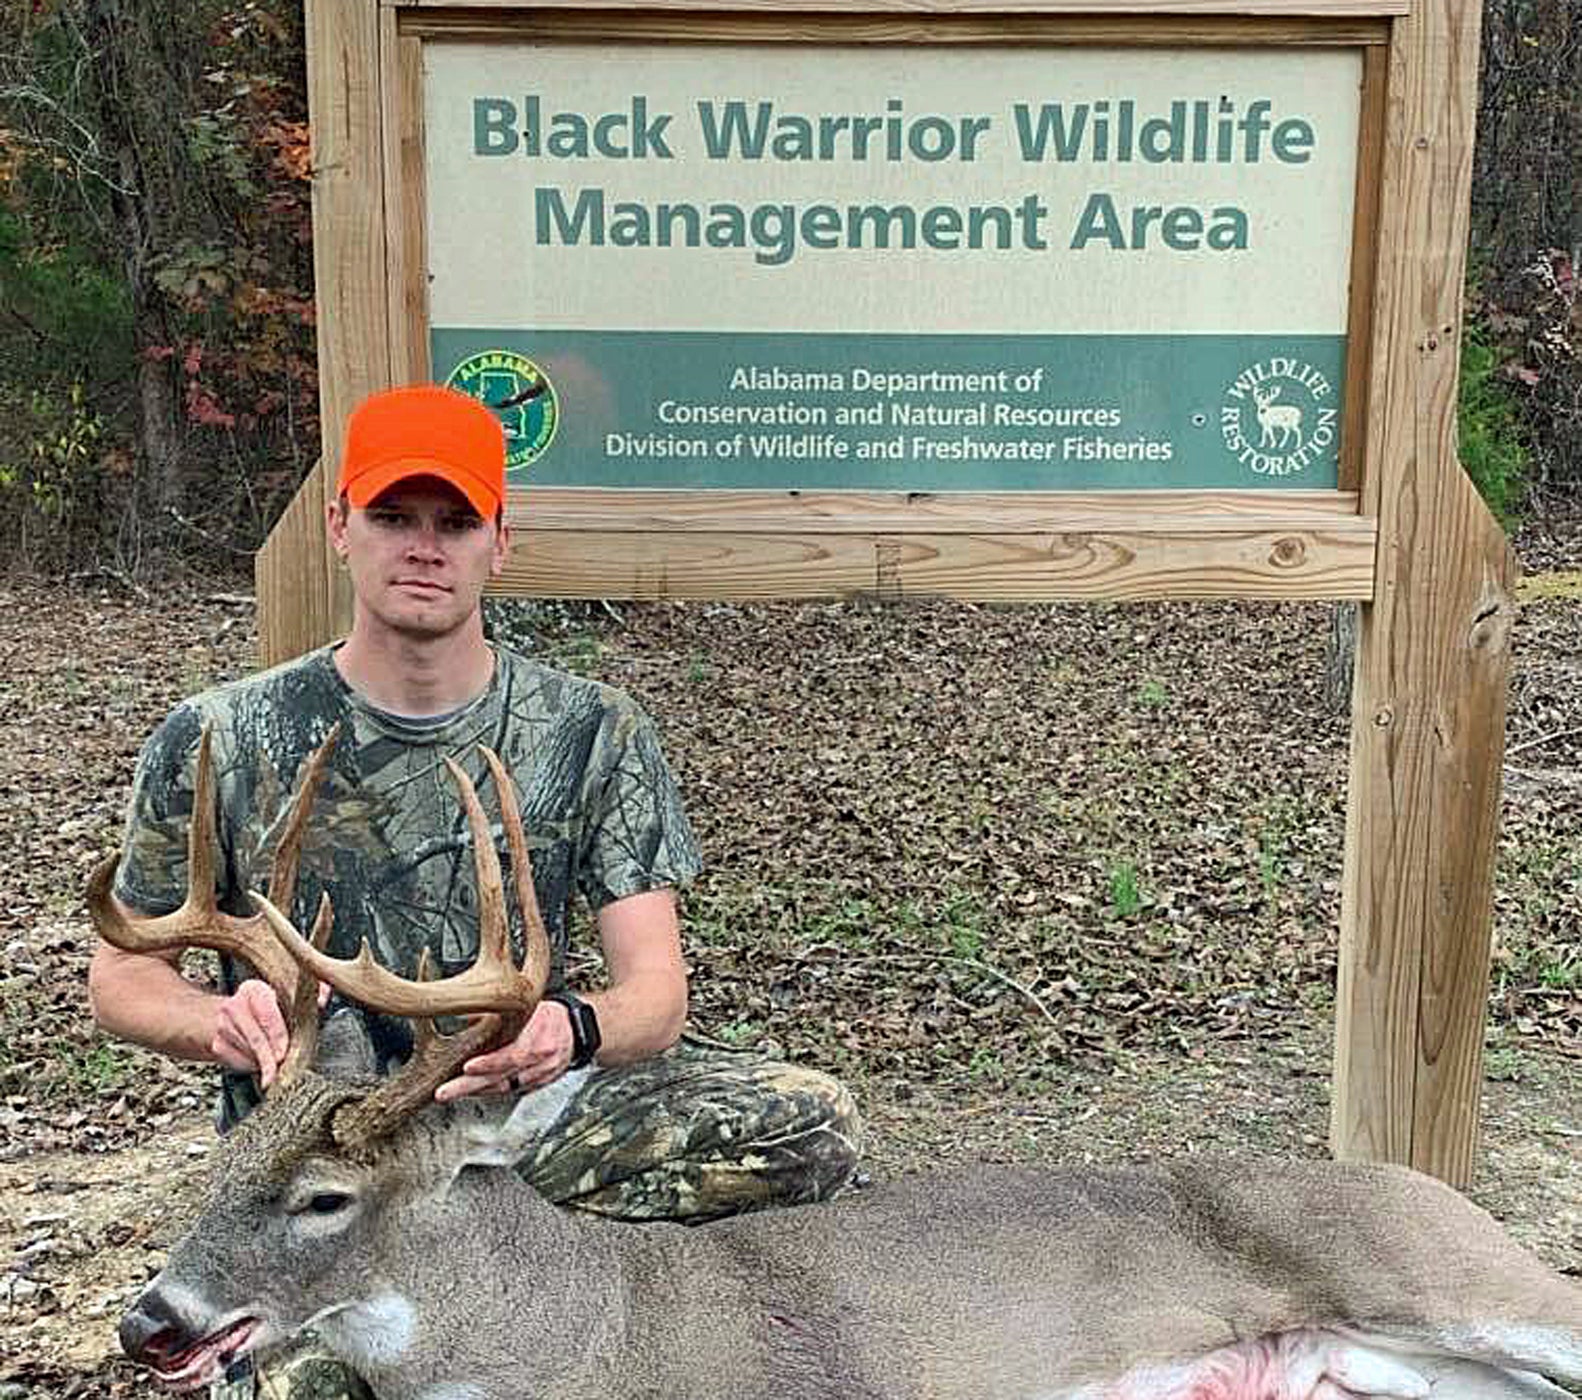 Public Land Provides Opportunities to Hunt Rut All Season Outdoor Alabama